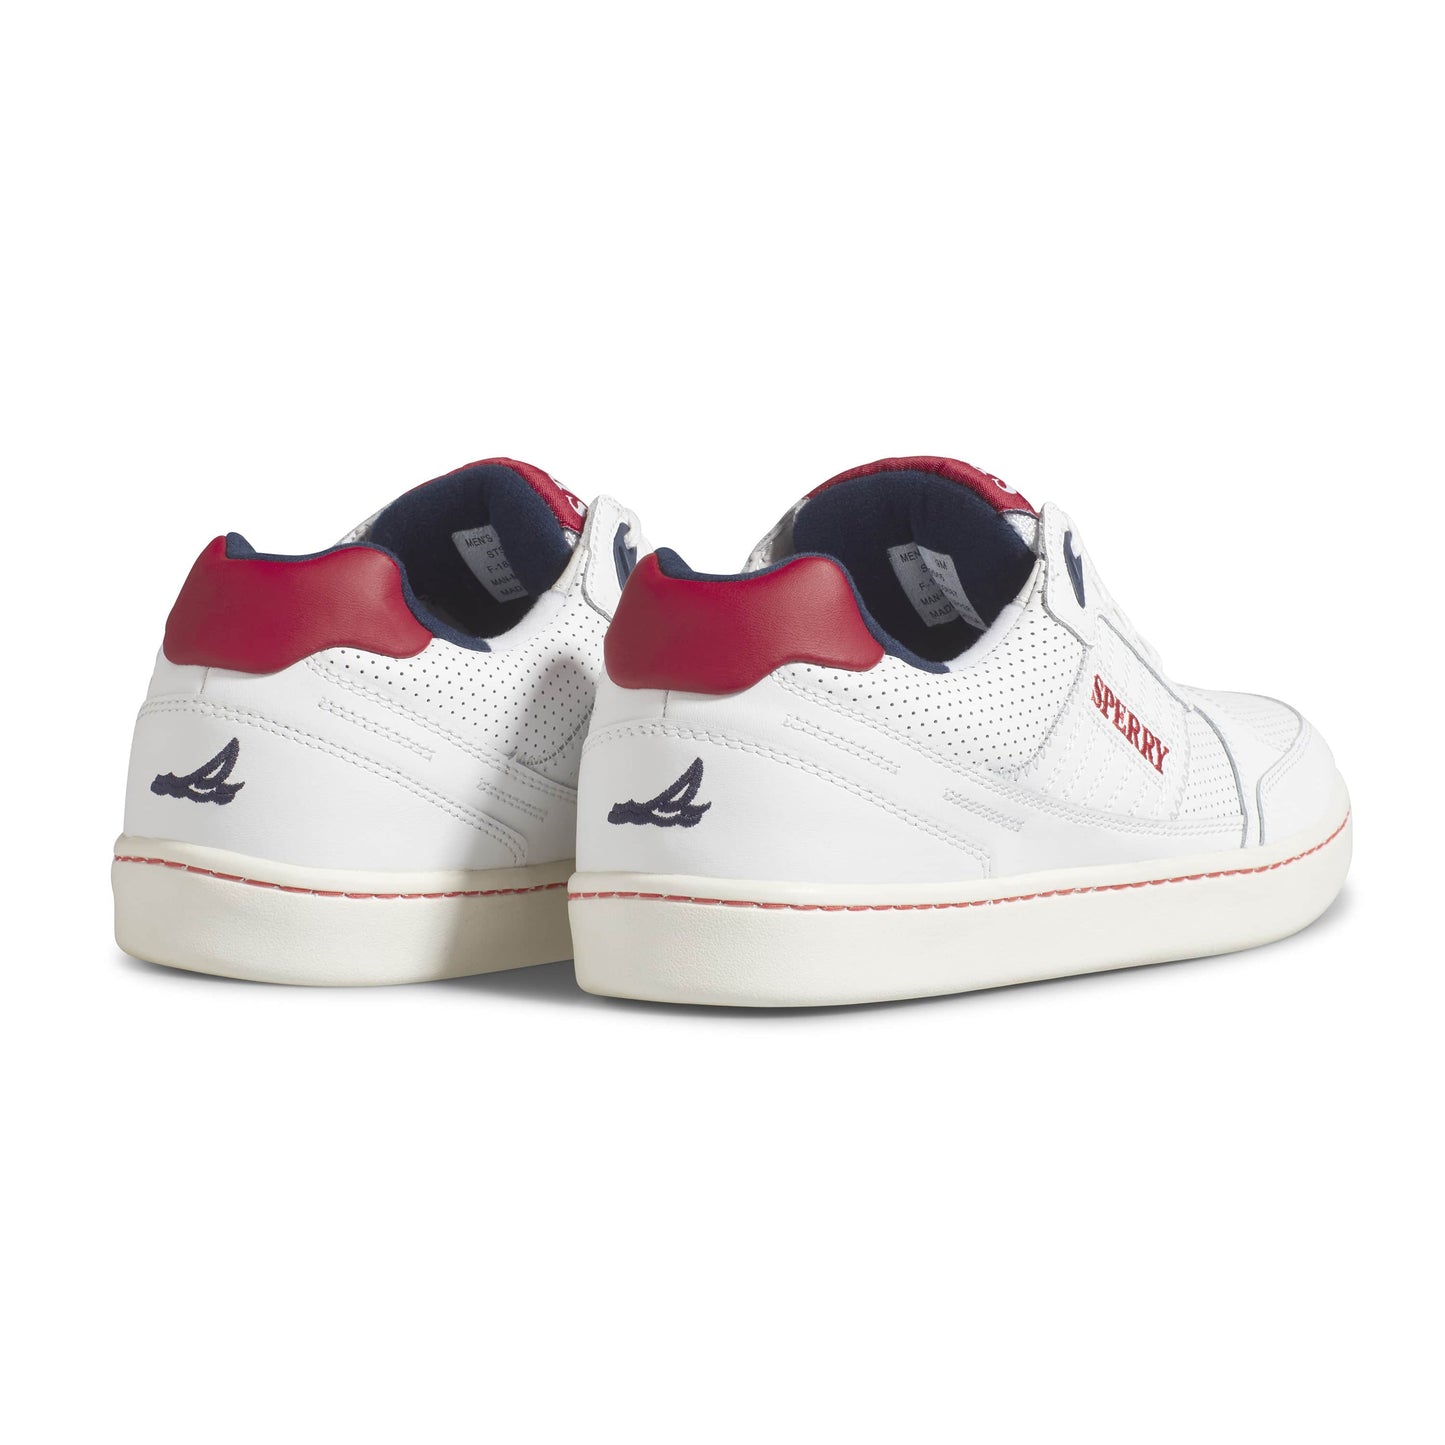 Sperry X Rowing Blazers Sperry Cup Sailing Sneaker